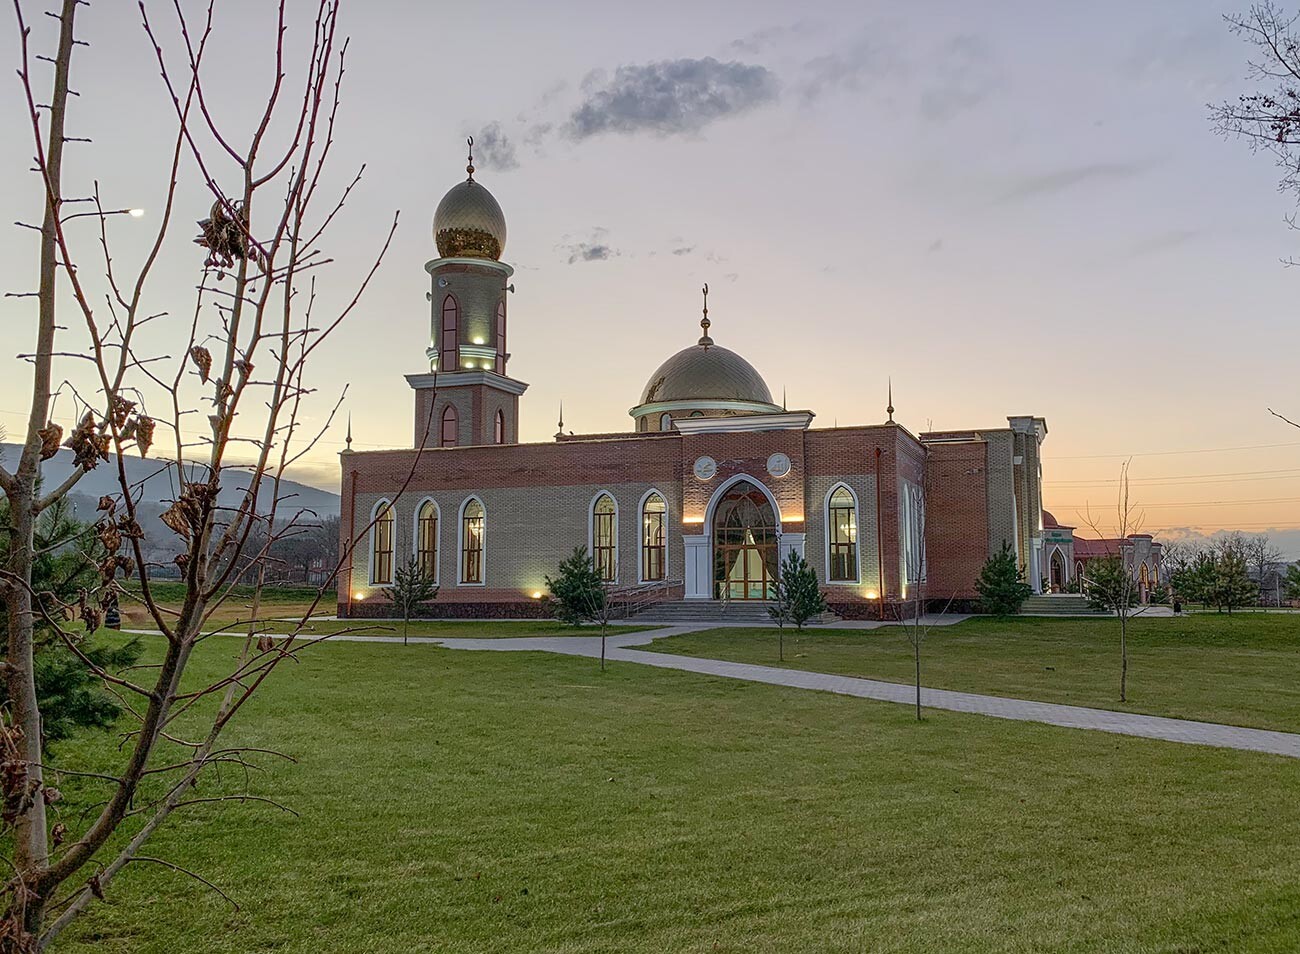 Rural mosques in Chechnya are often architecturally similar to churches